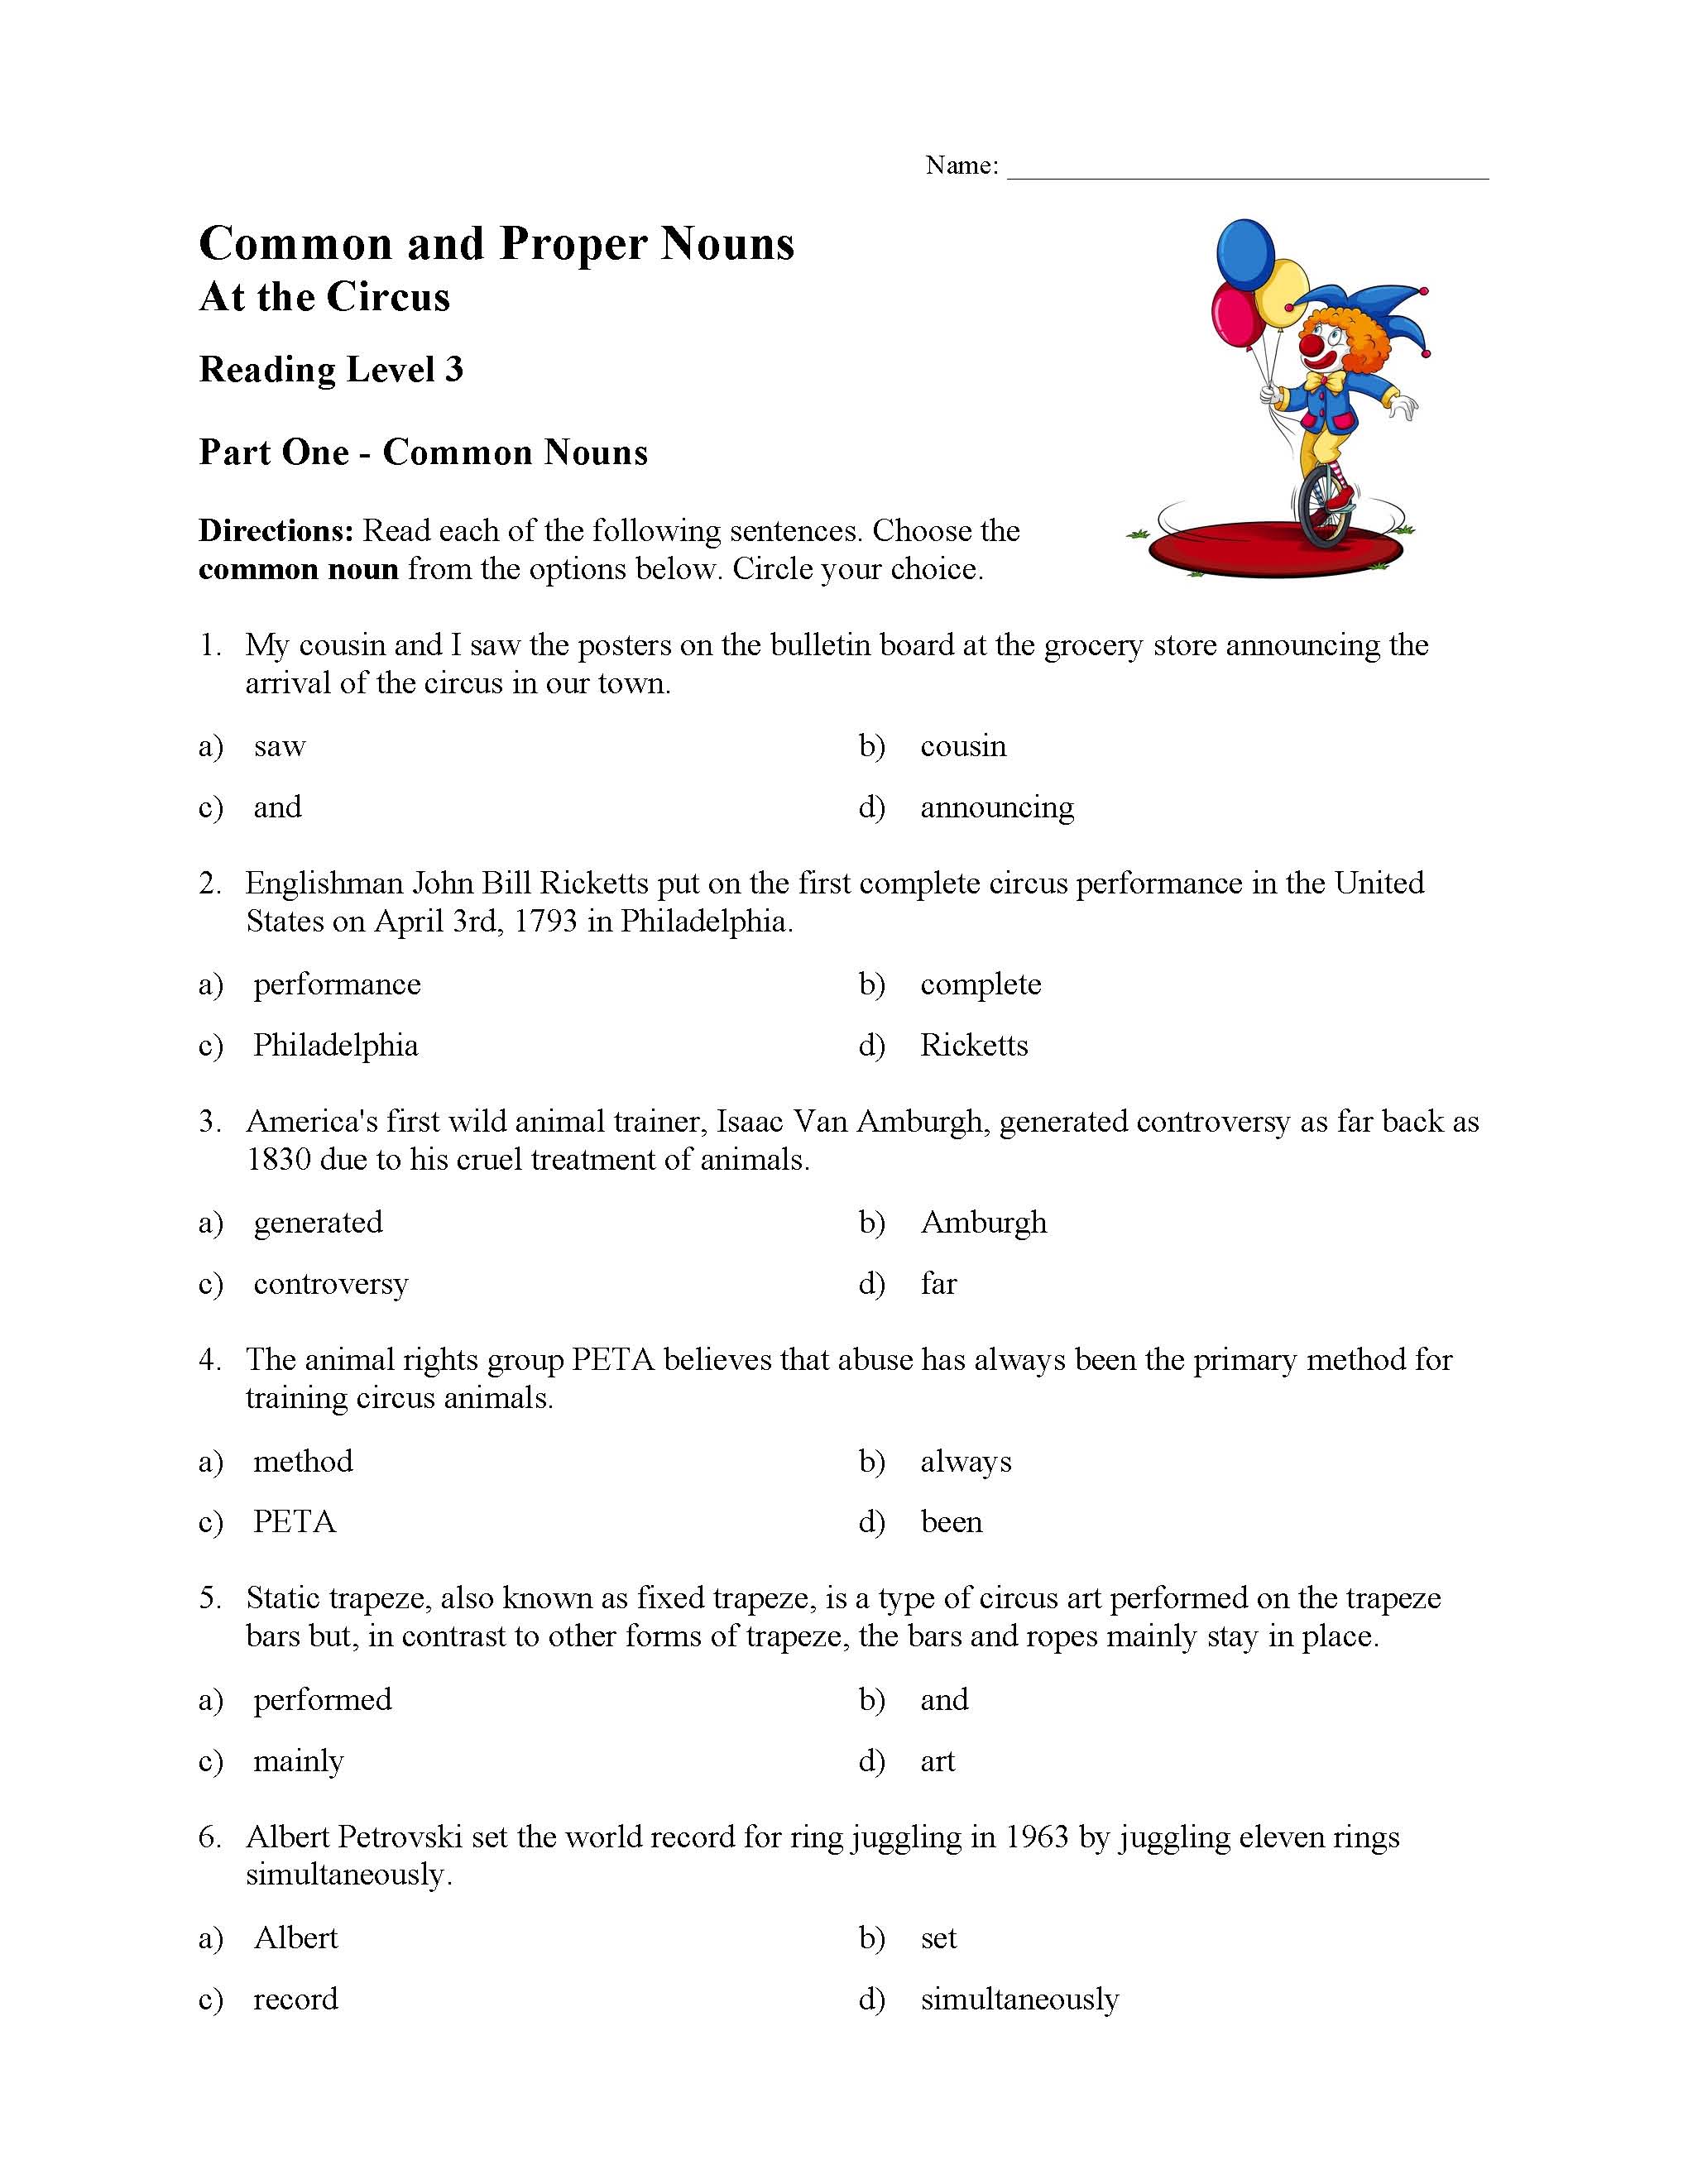 Common And Proper Nouns Test 3 Reading Level 3 Preview